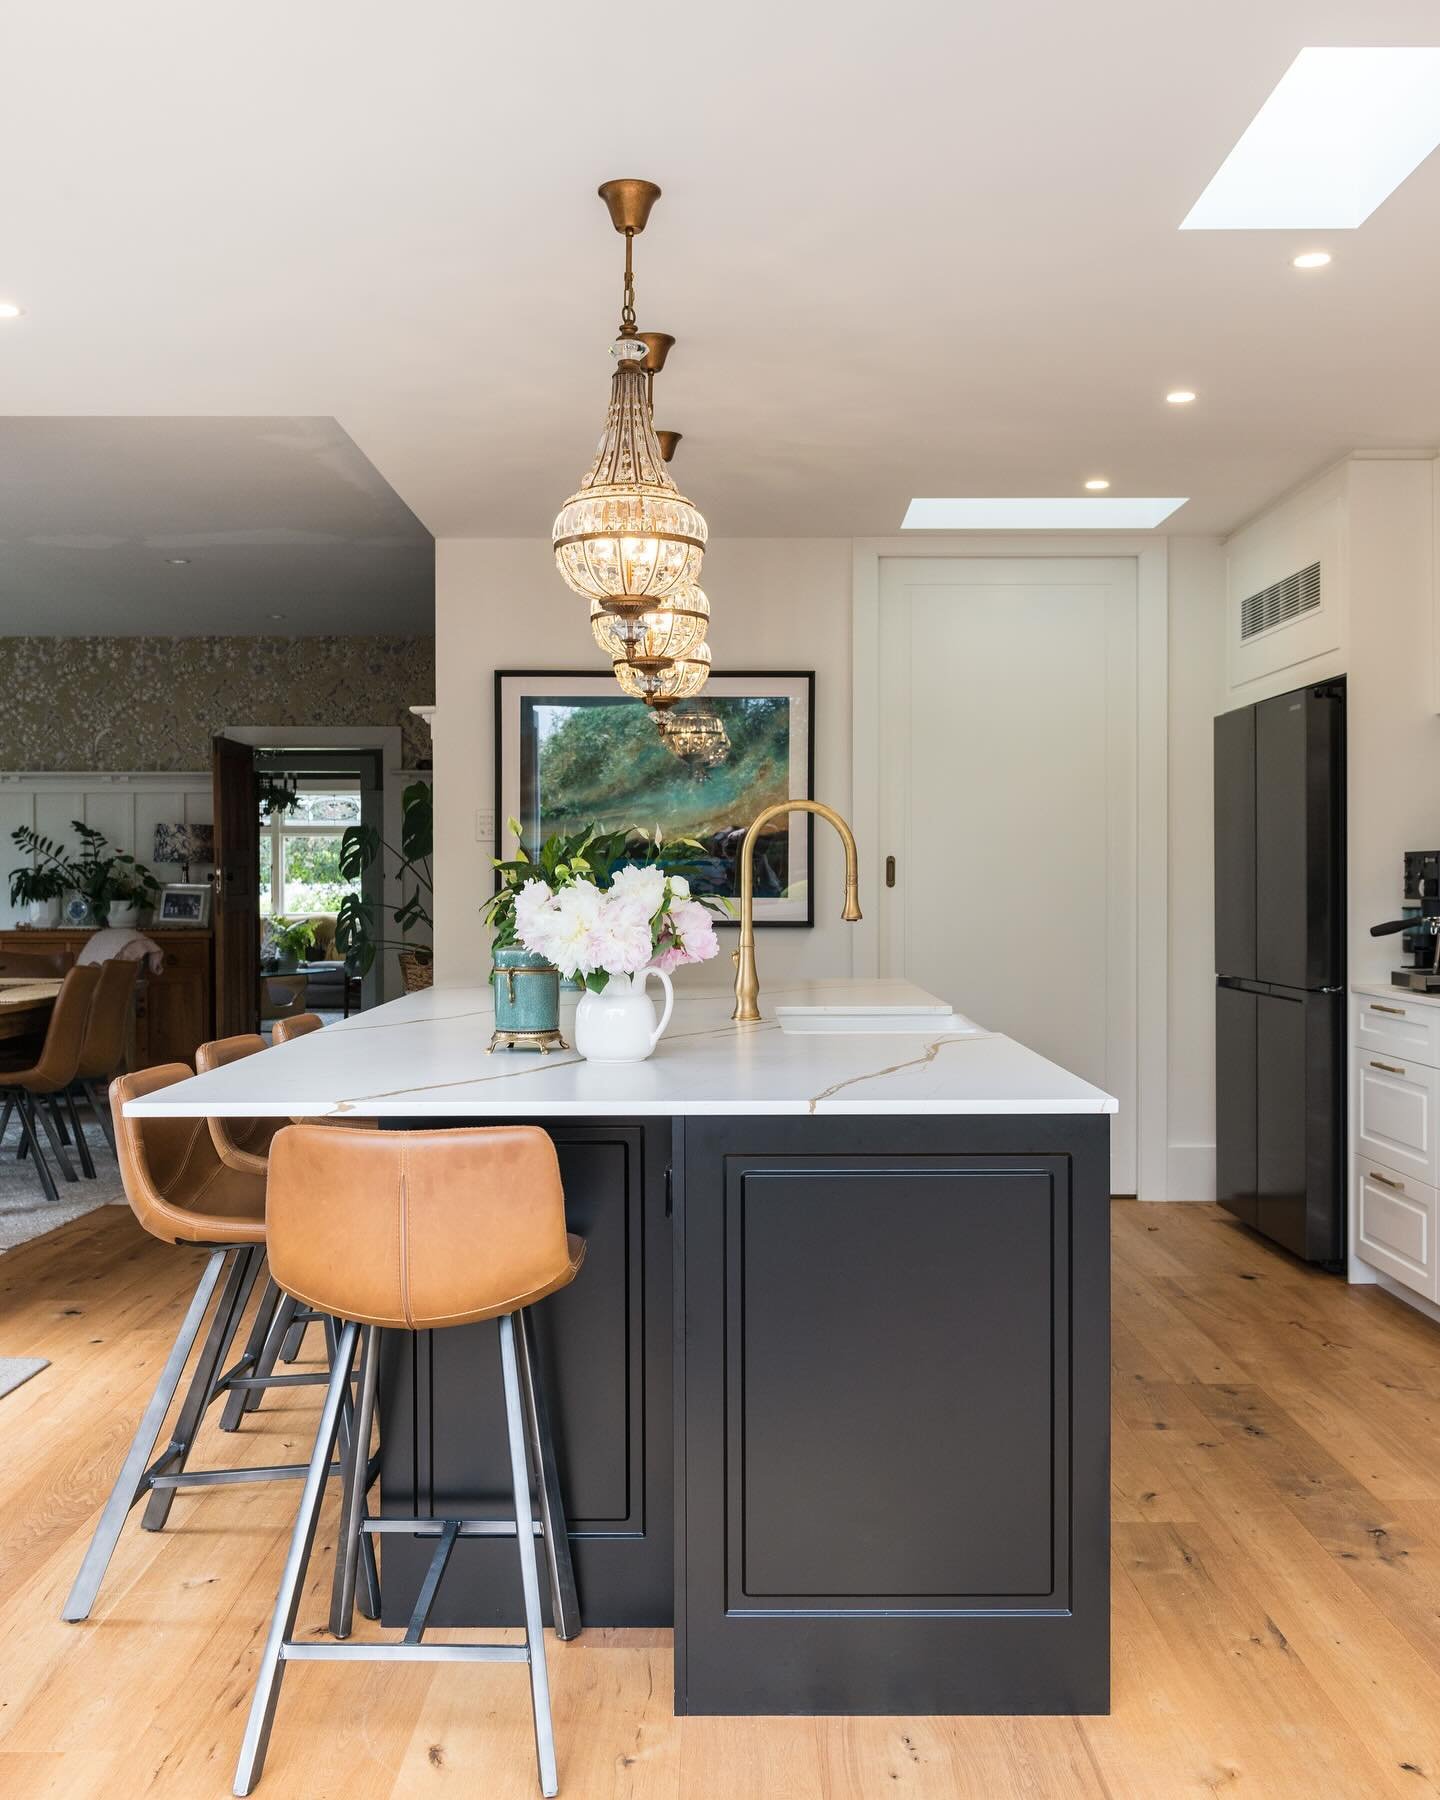 More photos from our Cholmondeley project that we completed at the end year of last year ✨

Photography by Kate Claridge 

#ryanskitchens #kitchendesign #kitchendesignnz #interiordesign #interiorjoinery #shakerstyle #silestone